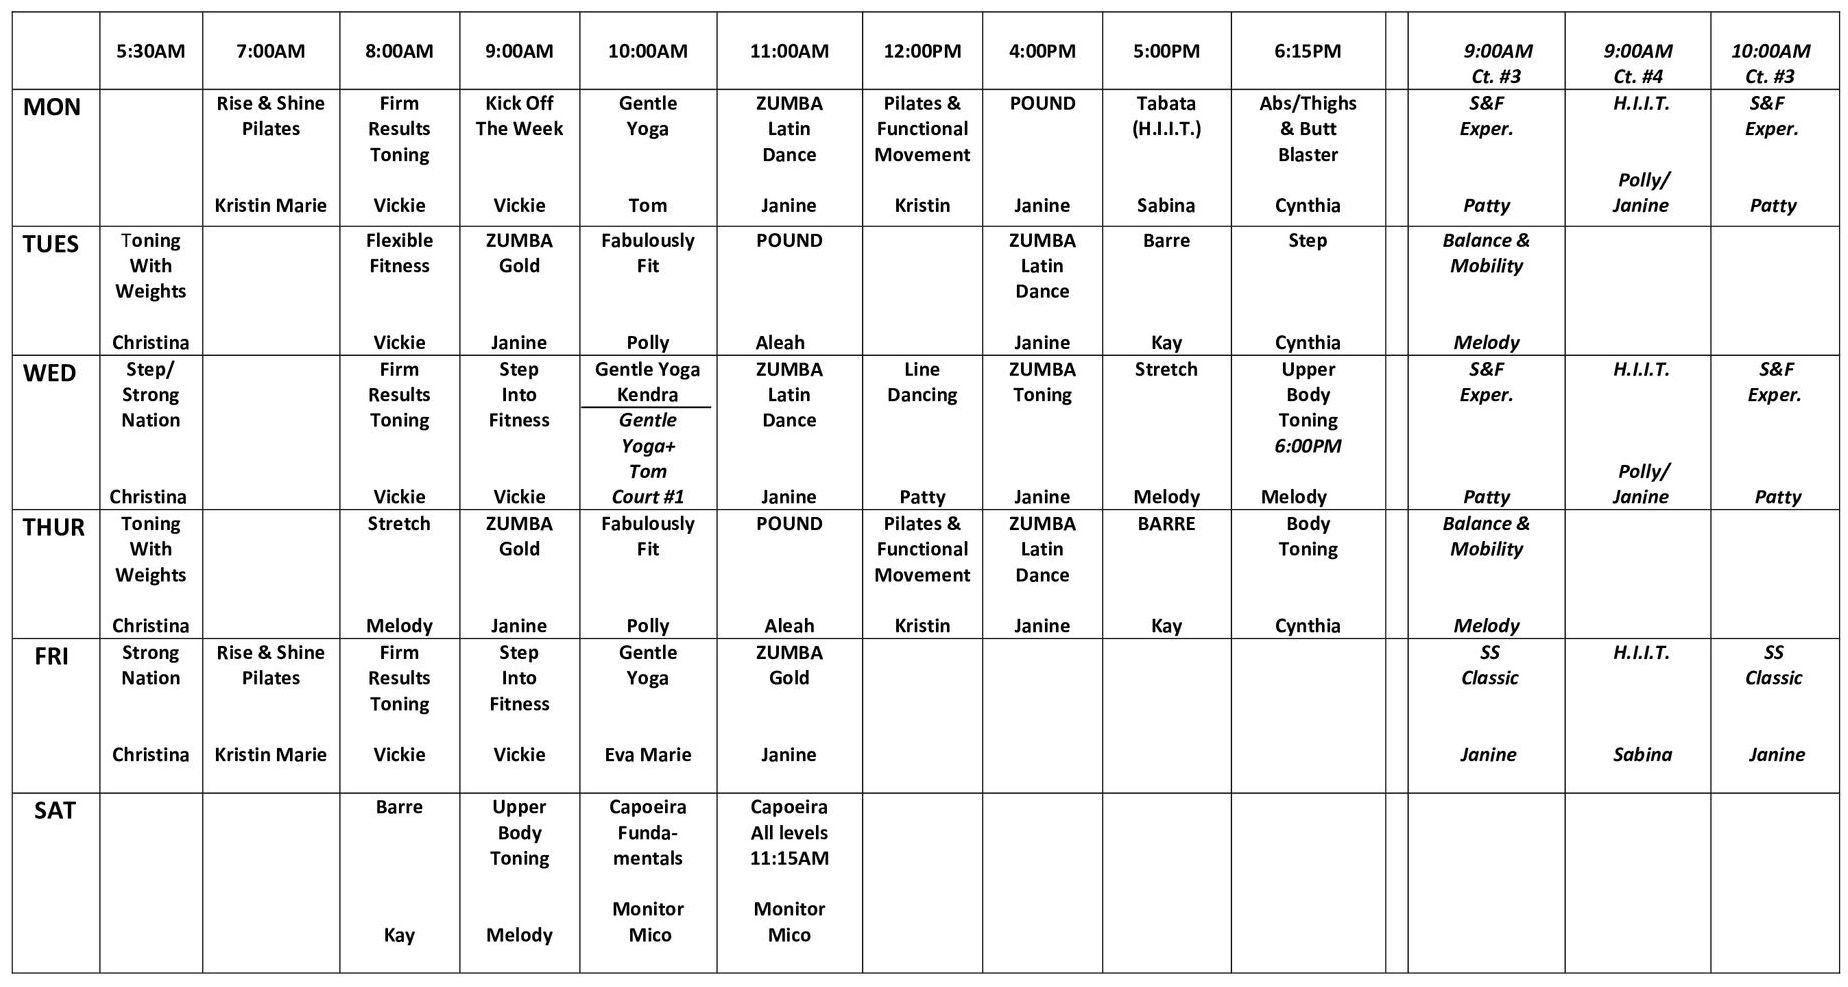 CRC Fitness Classes Schedule - Cochise Health and Request Club